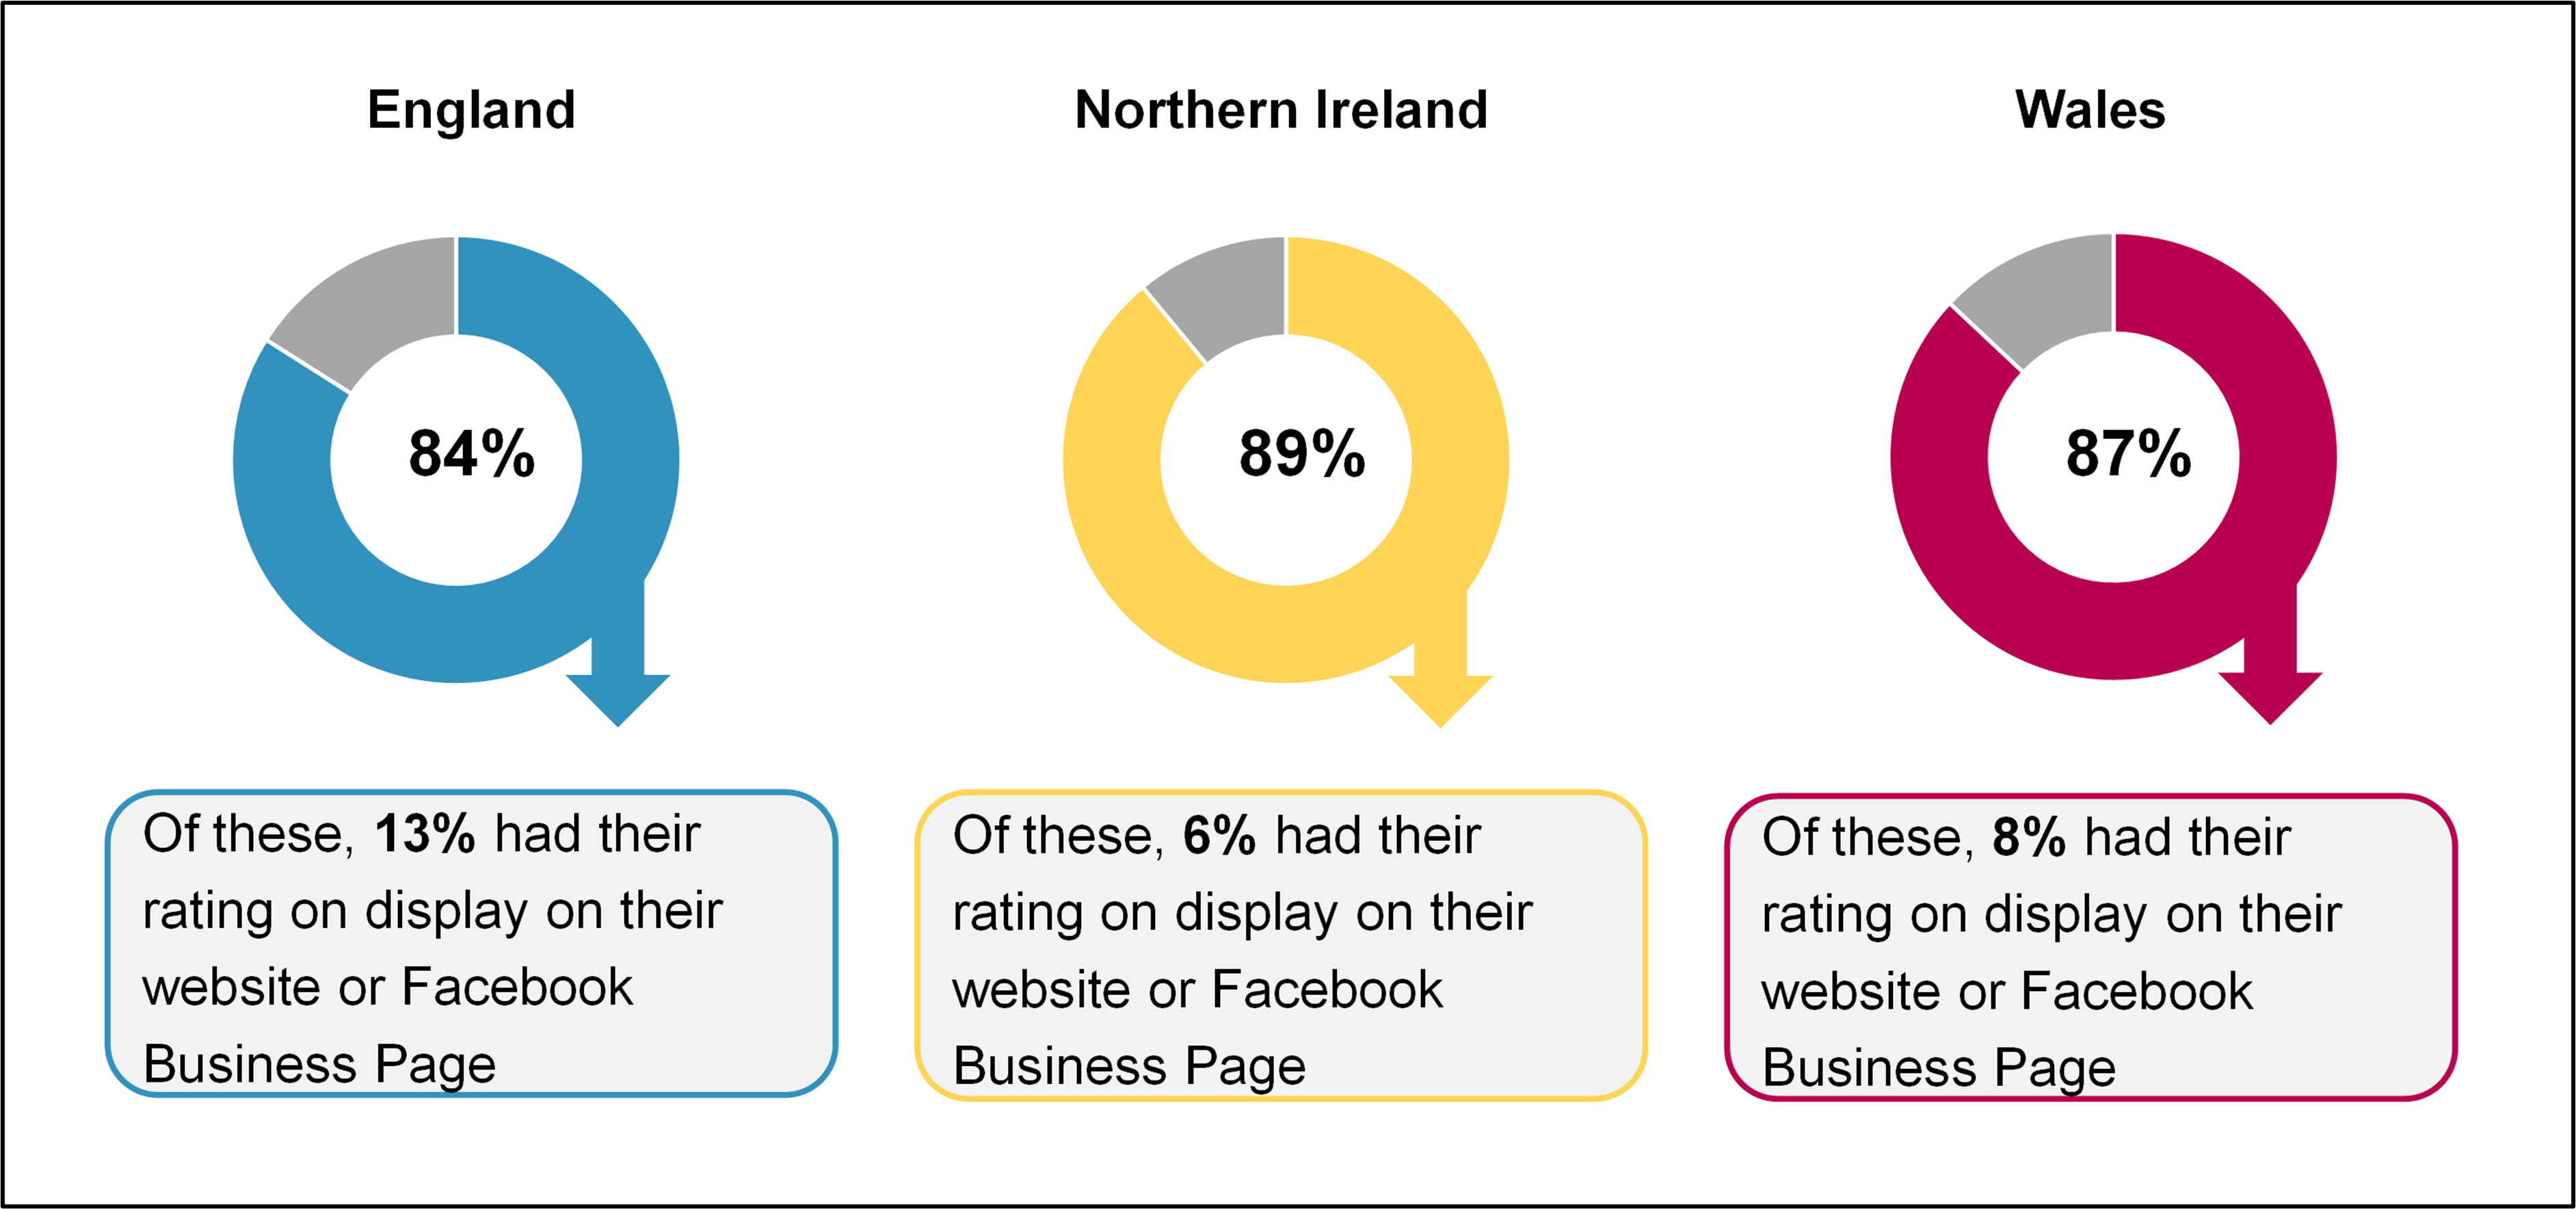 England: 84% - Of these, 13% had their rating on display on their website or Facebook Business Page.  Northern Ireland: 89% - Of these, 6% had their rating on display on their website or Facebook Business Page.  Wales: 87% - Of these, 8% had their rating on display on their website or Facebook Business Page.